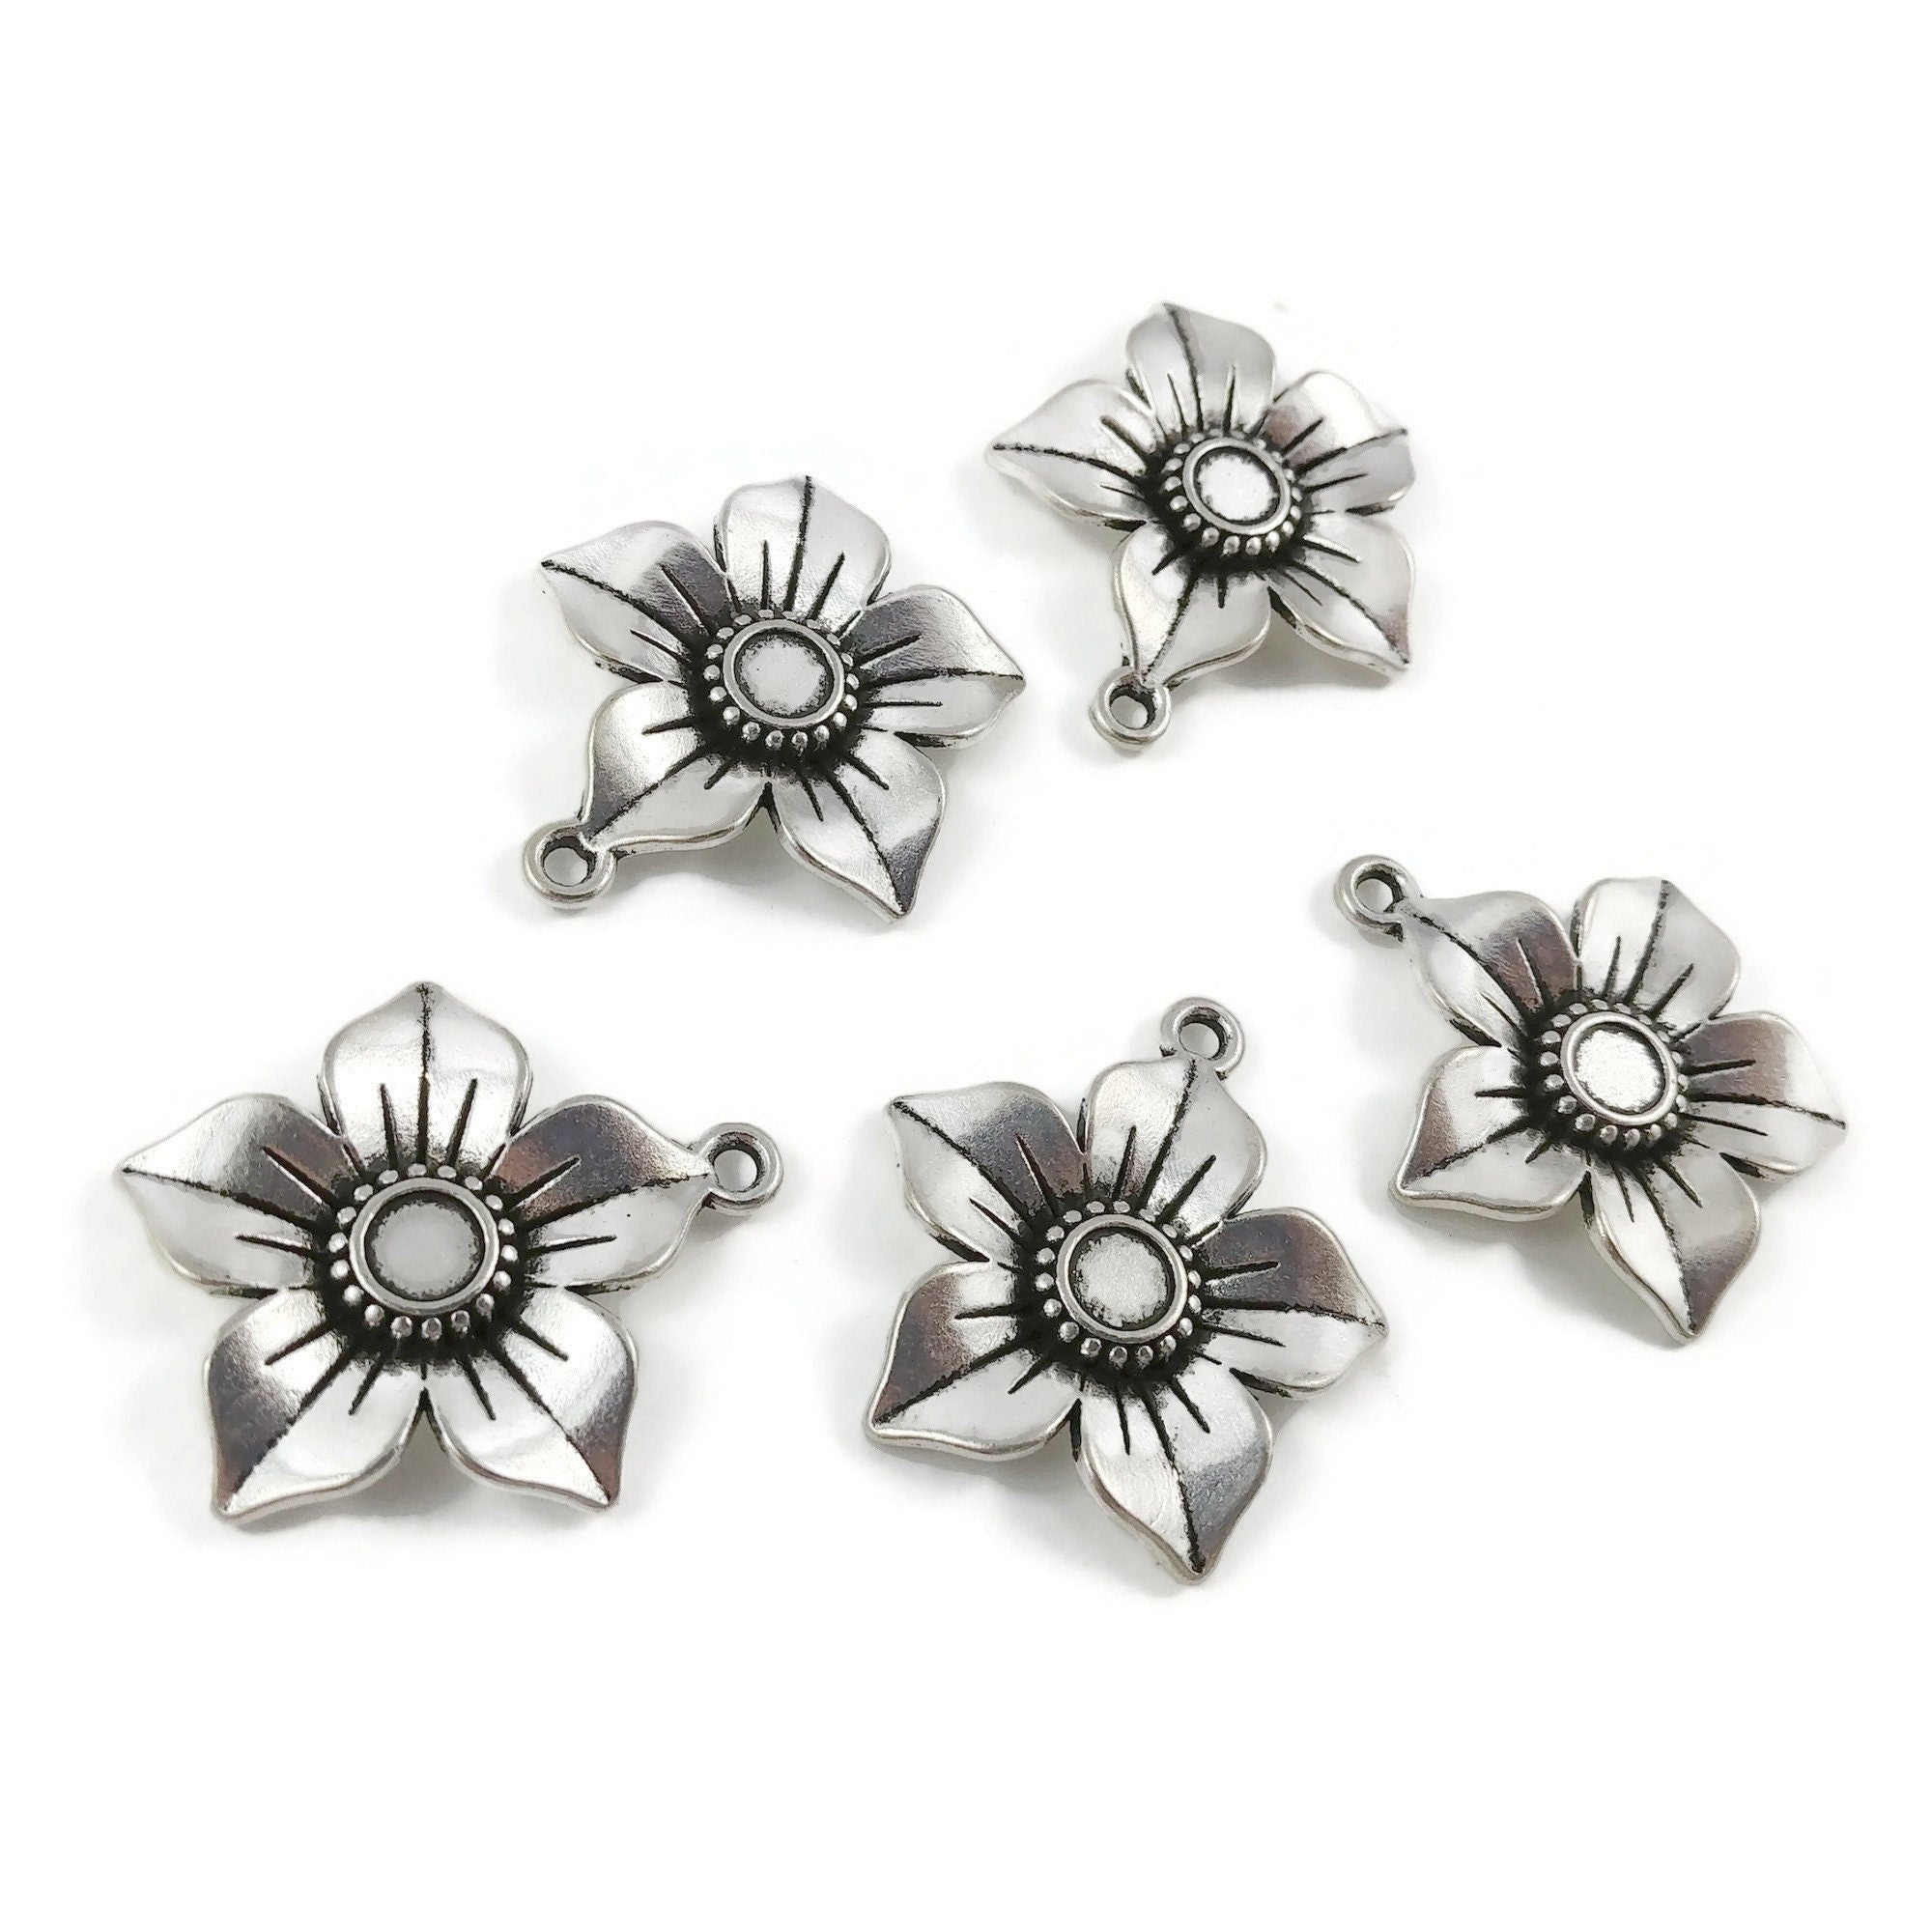 5 flower charms, 27mm nickel free metal pendants, 3D charms for jewelry making